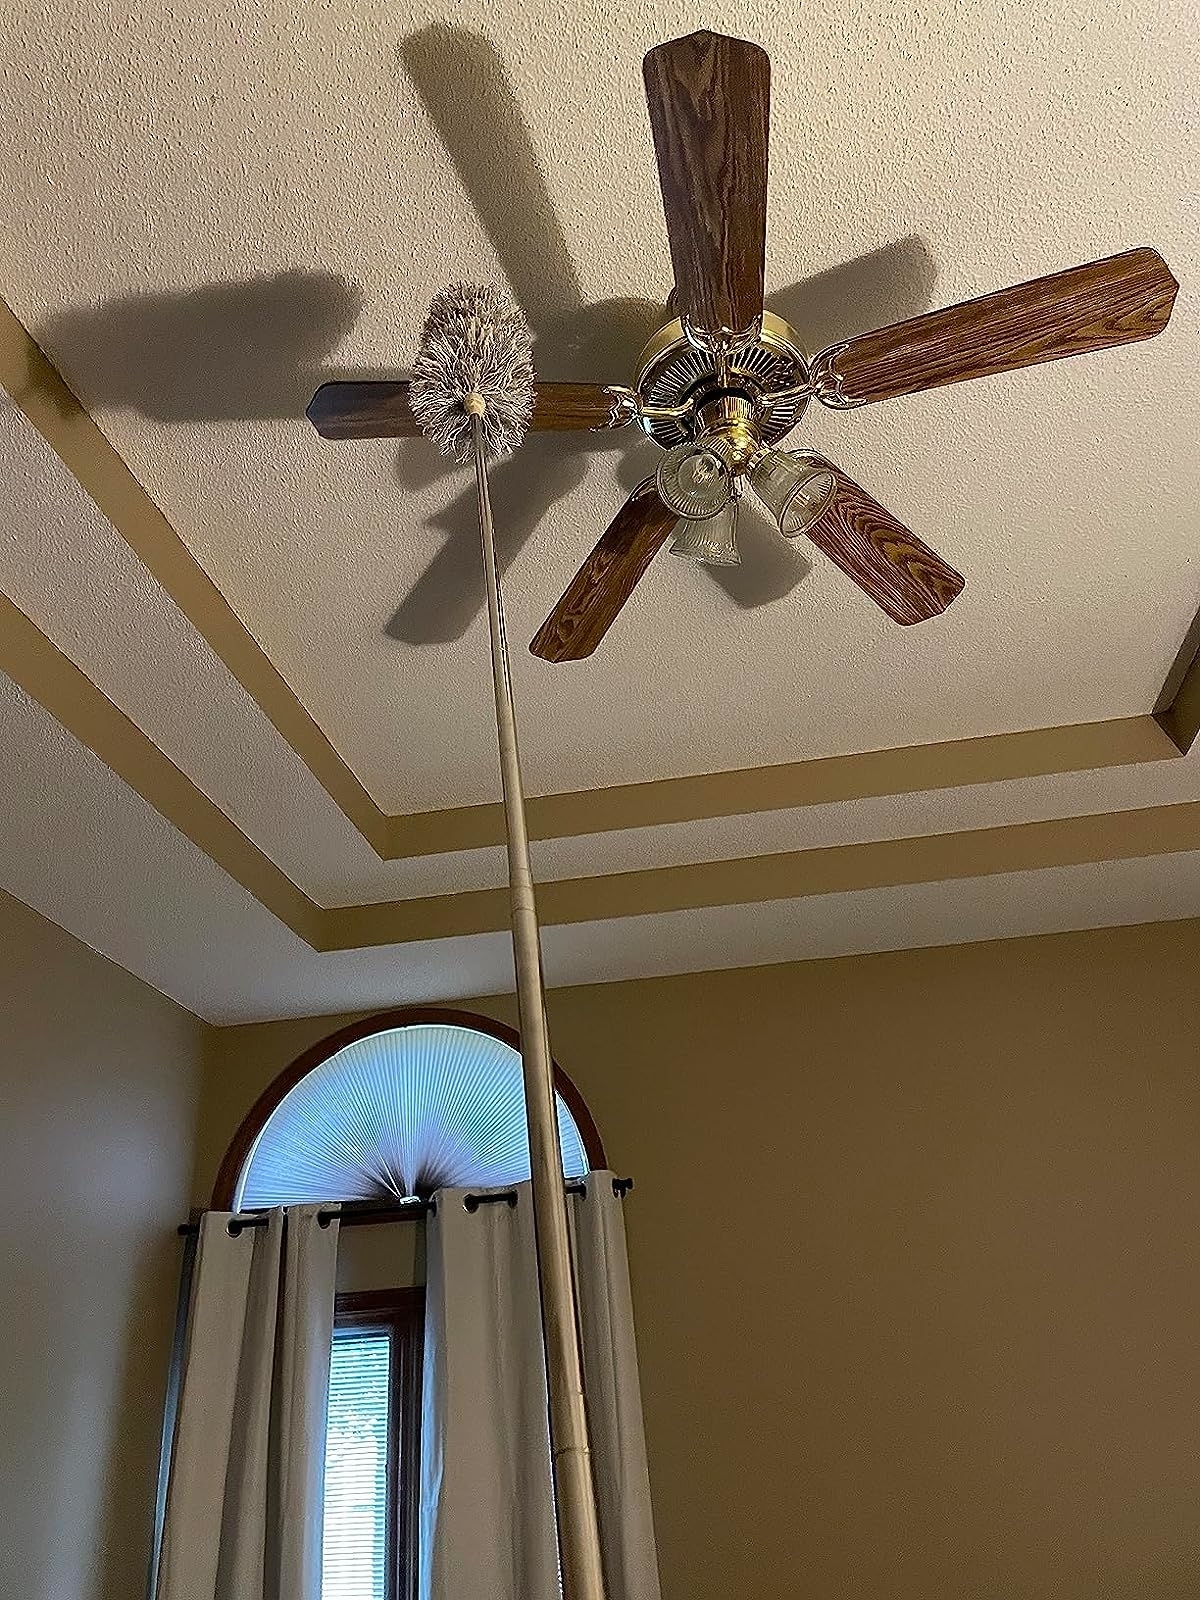 Reviewer image of the duster being used on their ceiling fan